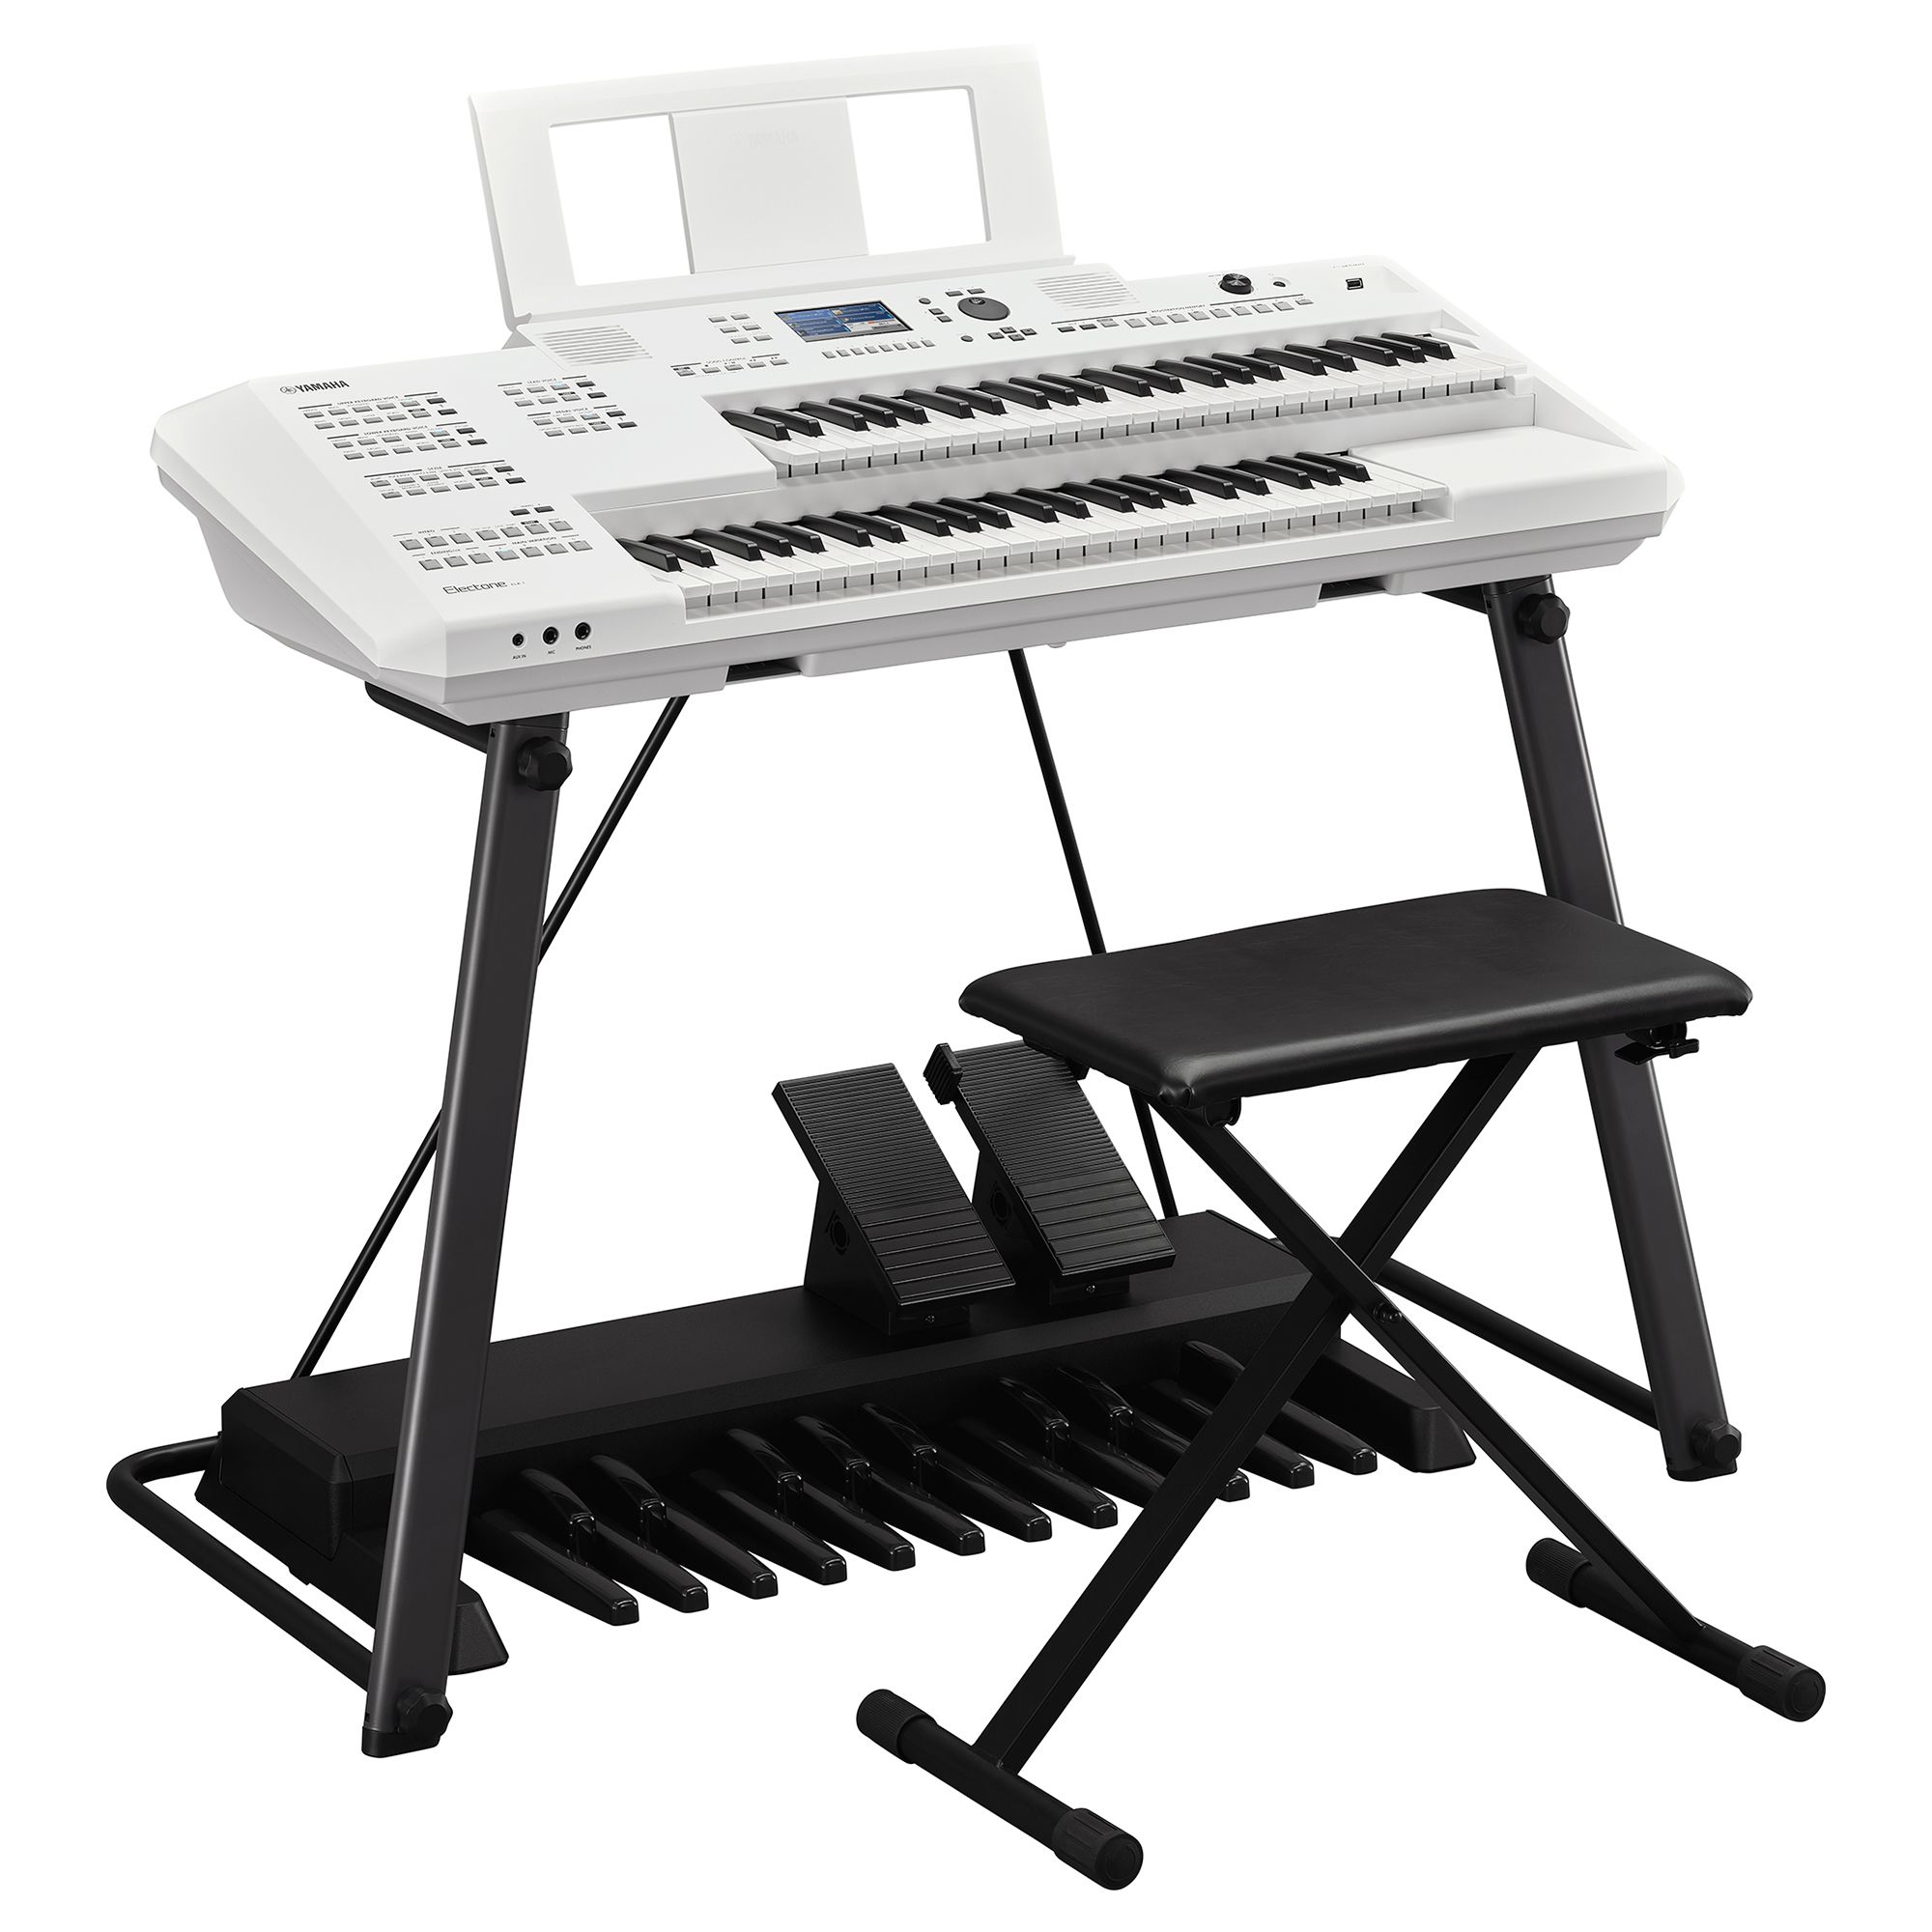 Electone - Keyboard Instruments - Musical Instruments - Products